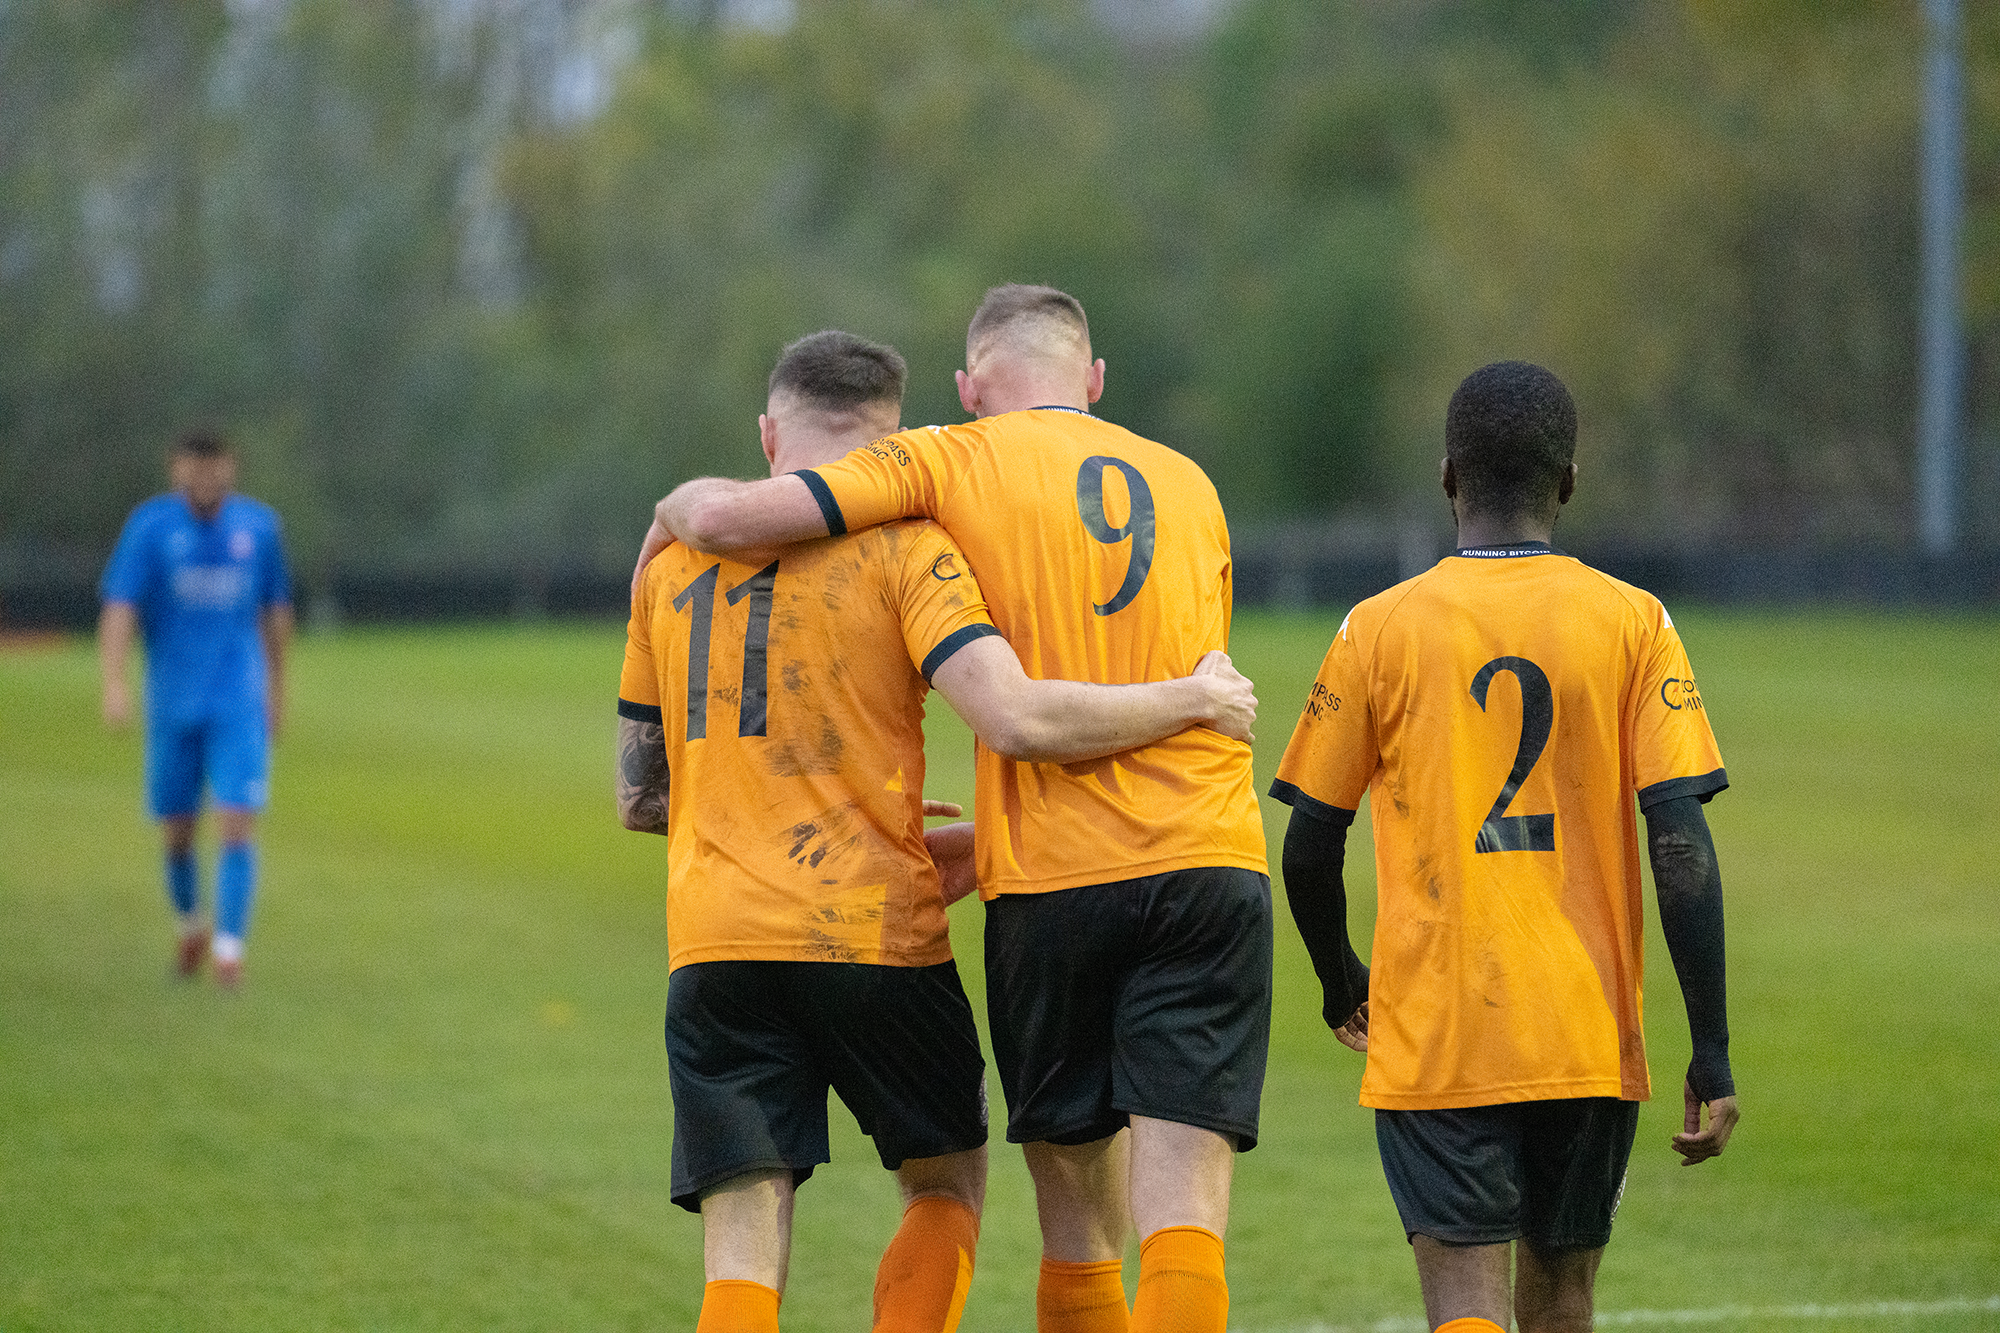 20221105 Real Bedford vs Raunds Town-1763.png